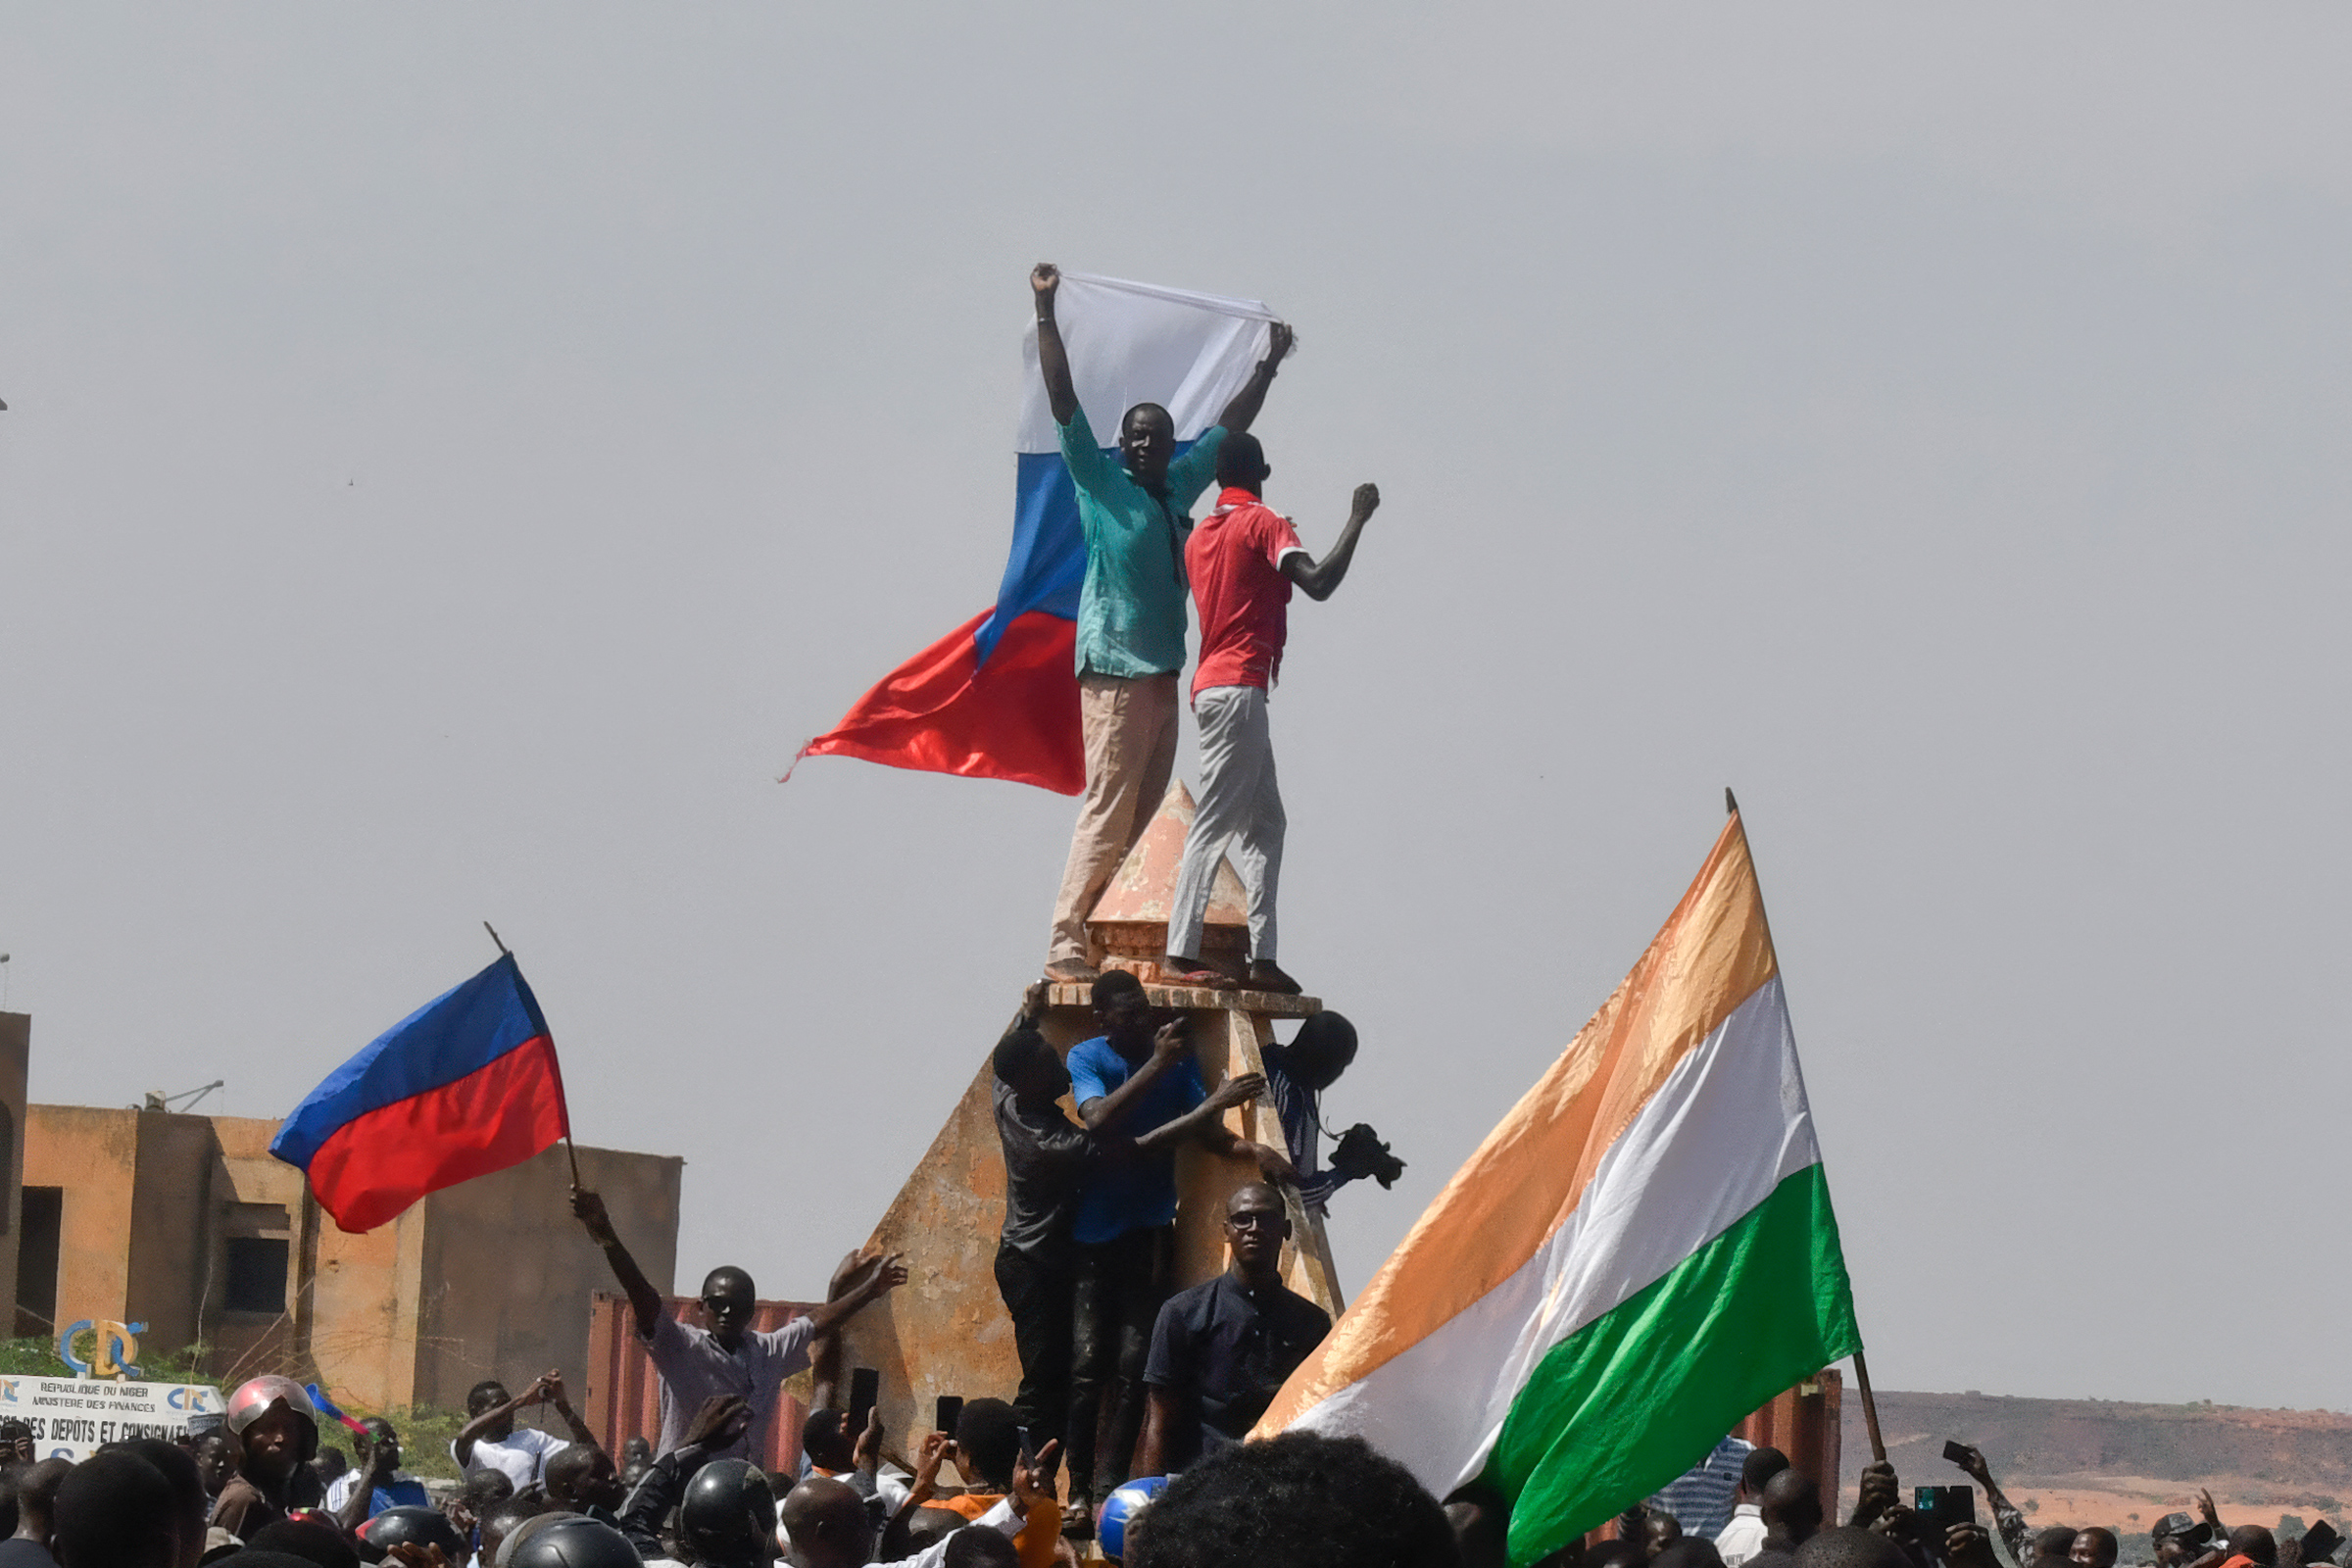 Protesters wave Nigerien and Russian flags as they gather during a rally in support of Niger's junta in Niamey, Niger, on July 30.